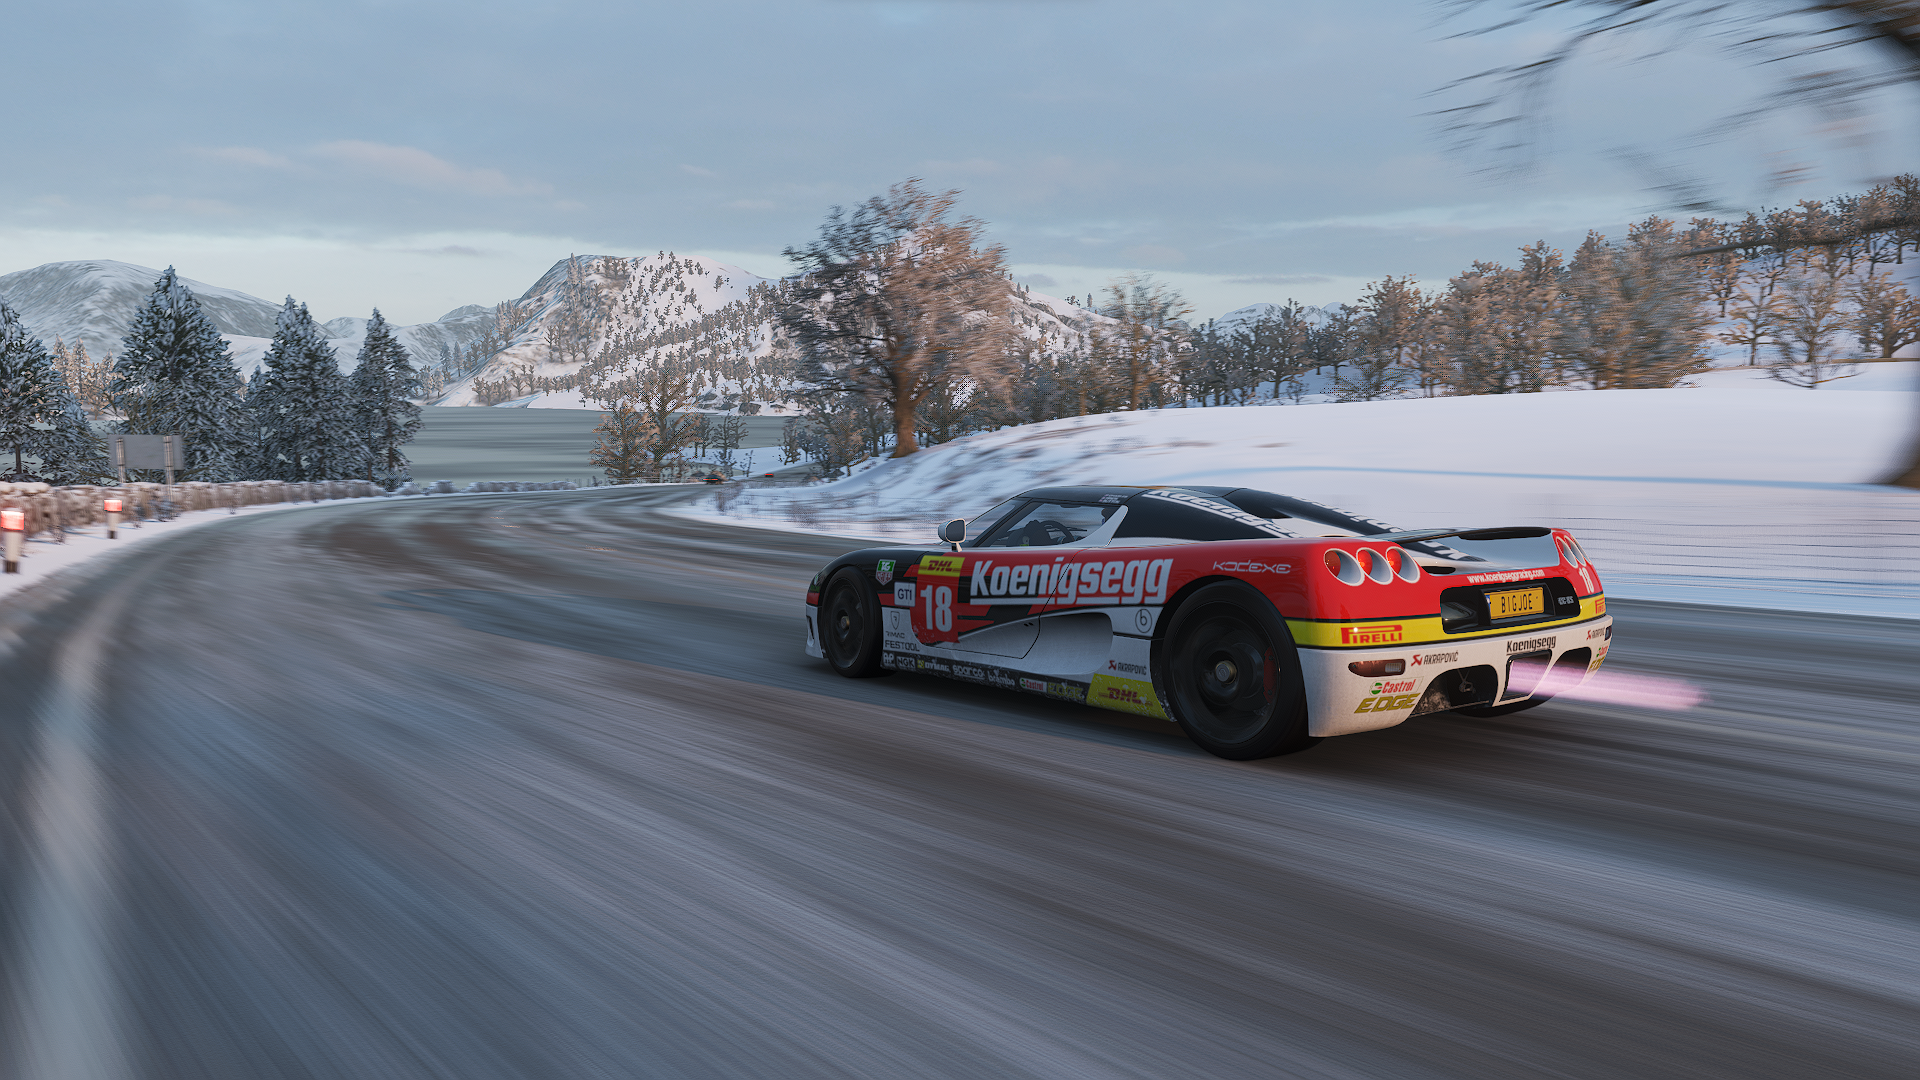 General 1920x1080 Forza Forza Horizon Forza Horizon 4 car racing video games side view licence plates road CGI trees snow clouds mountains Koenigsegg Swedish cars PlaygroundGames livery